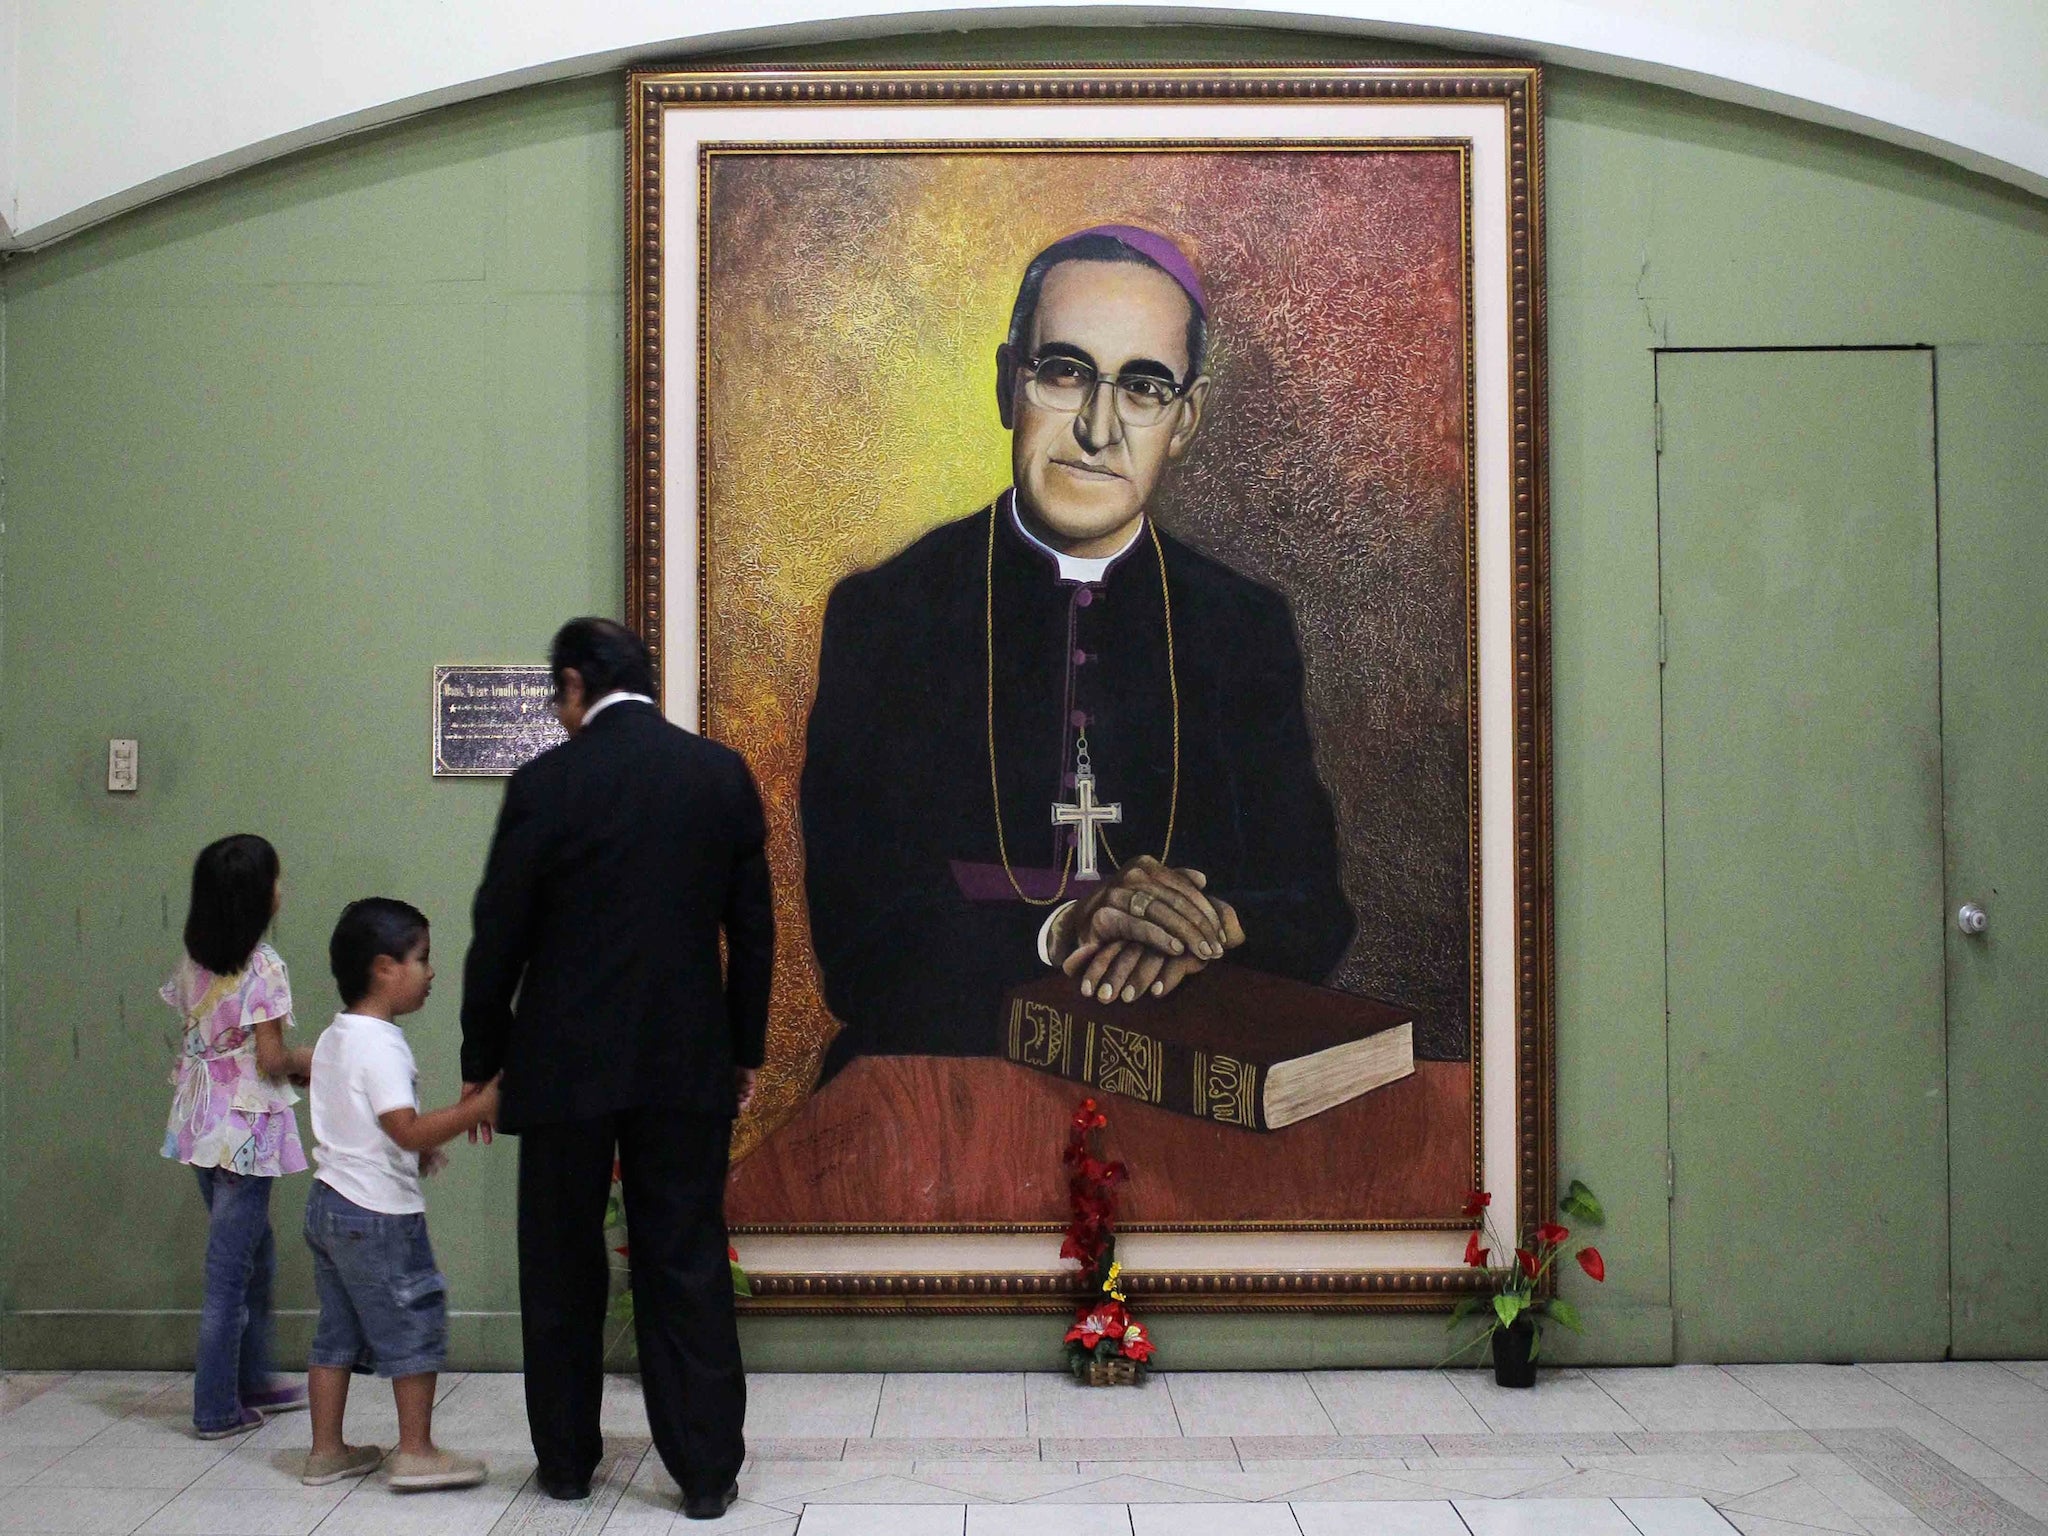 Supporters of Oscar Romero have long backed calls for him to be recognised as a saint